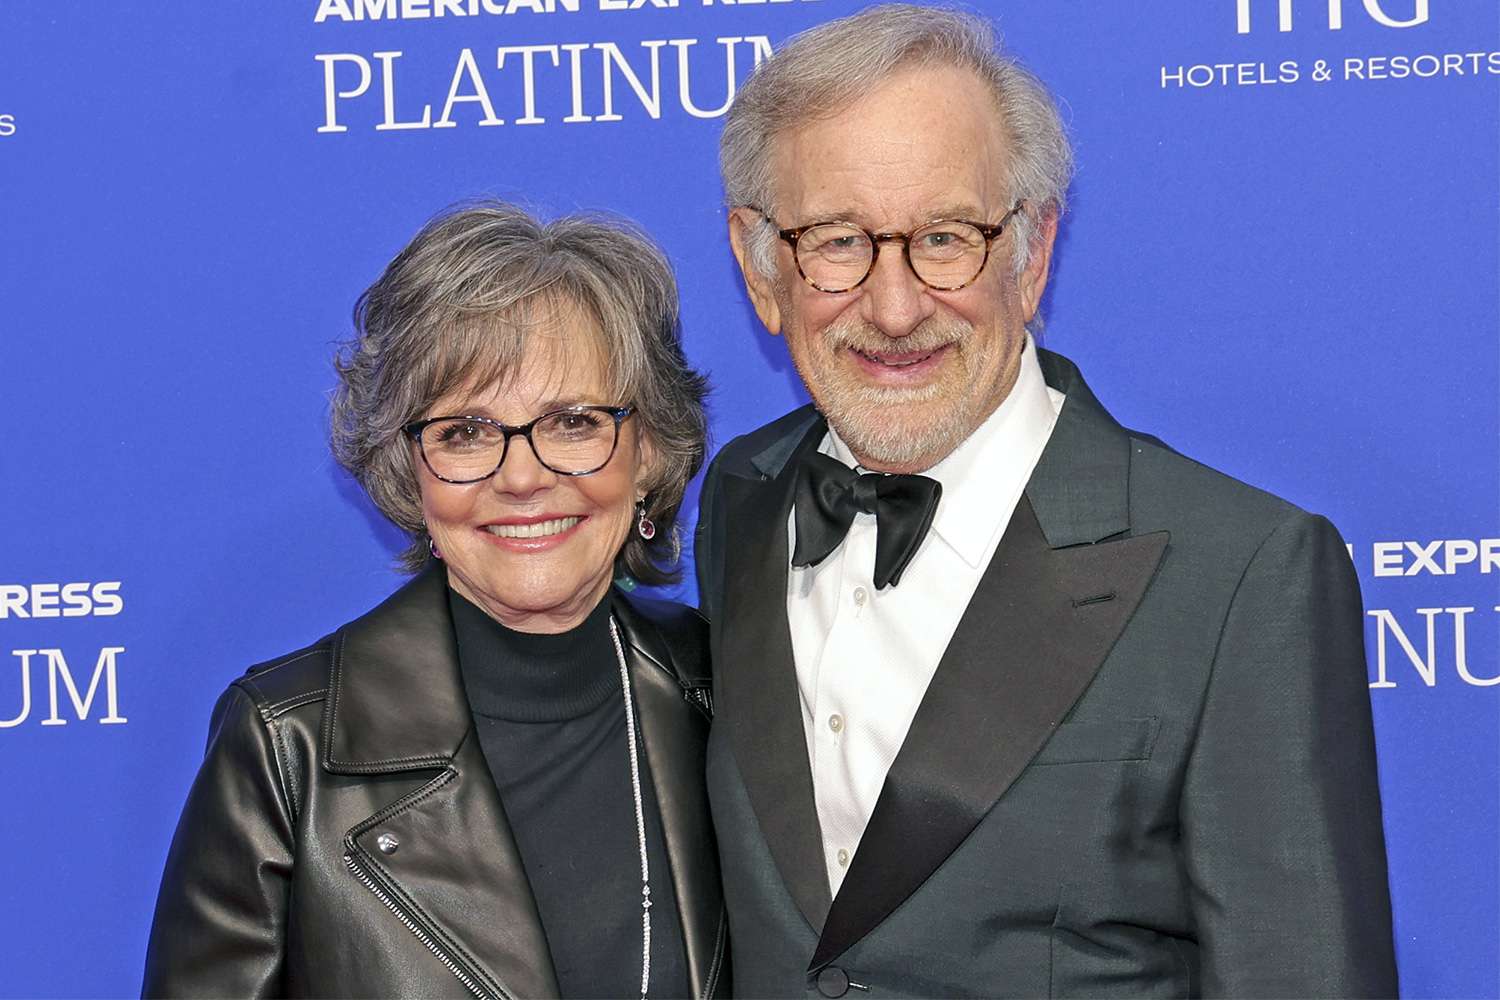 Sally Field and Steven Spielberg almost dated 50 years ago